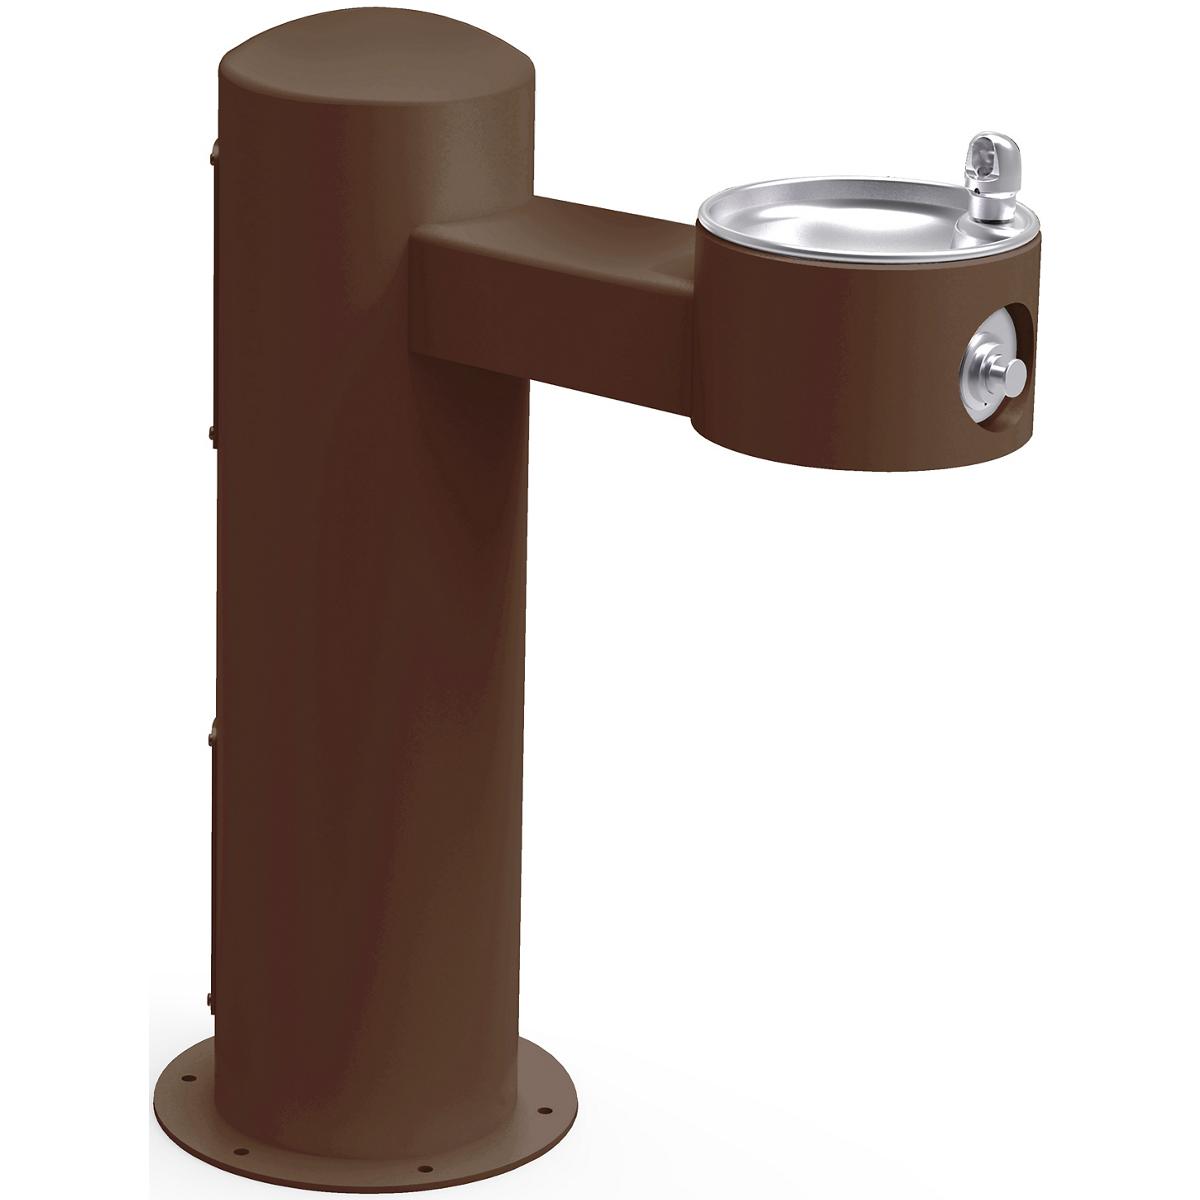 Elkay Outdoor Fountain Pedestal Non-Filtered Non-Refrigerated Freeze Resistant - 4410FRK